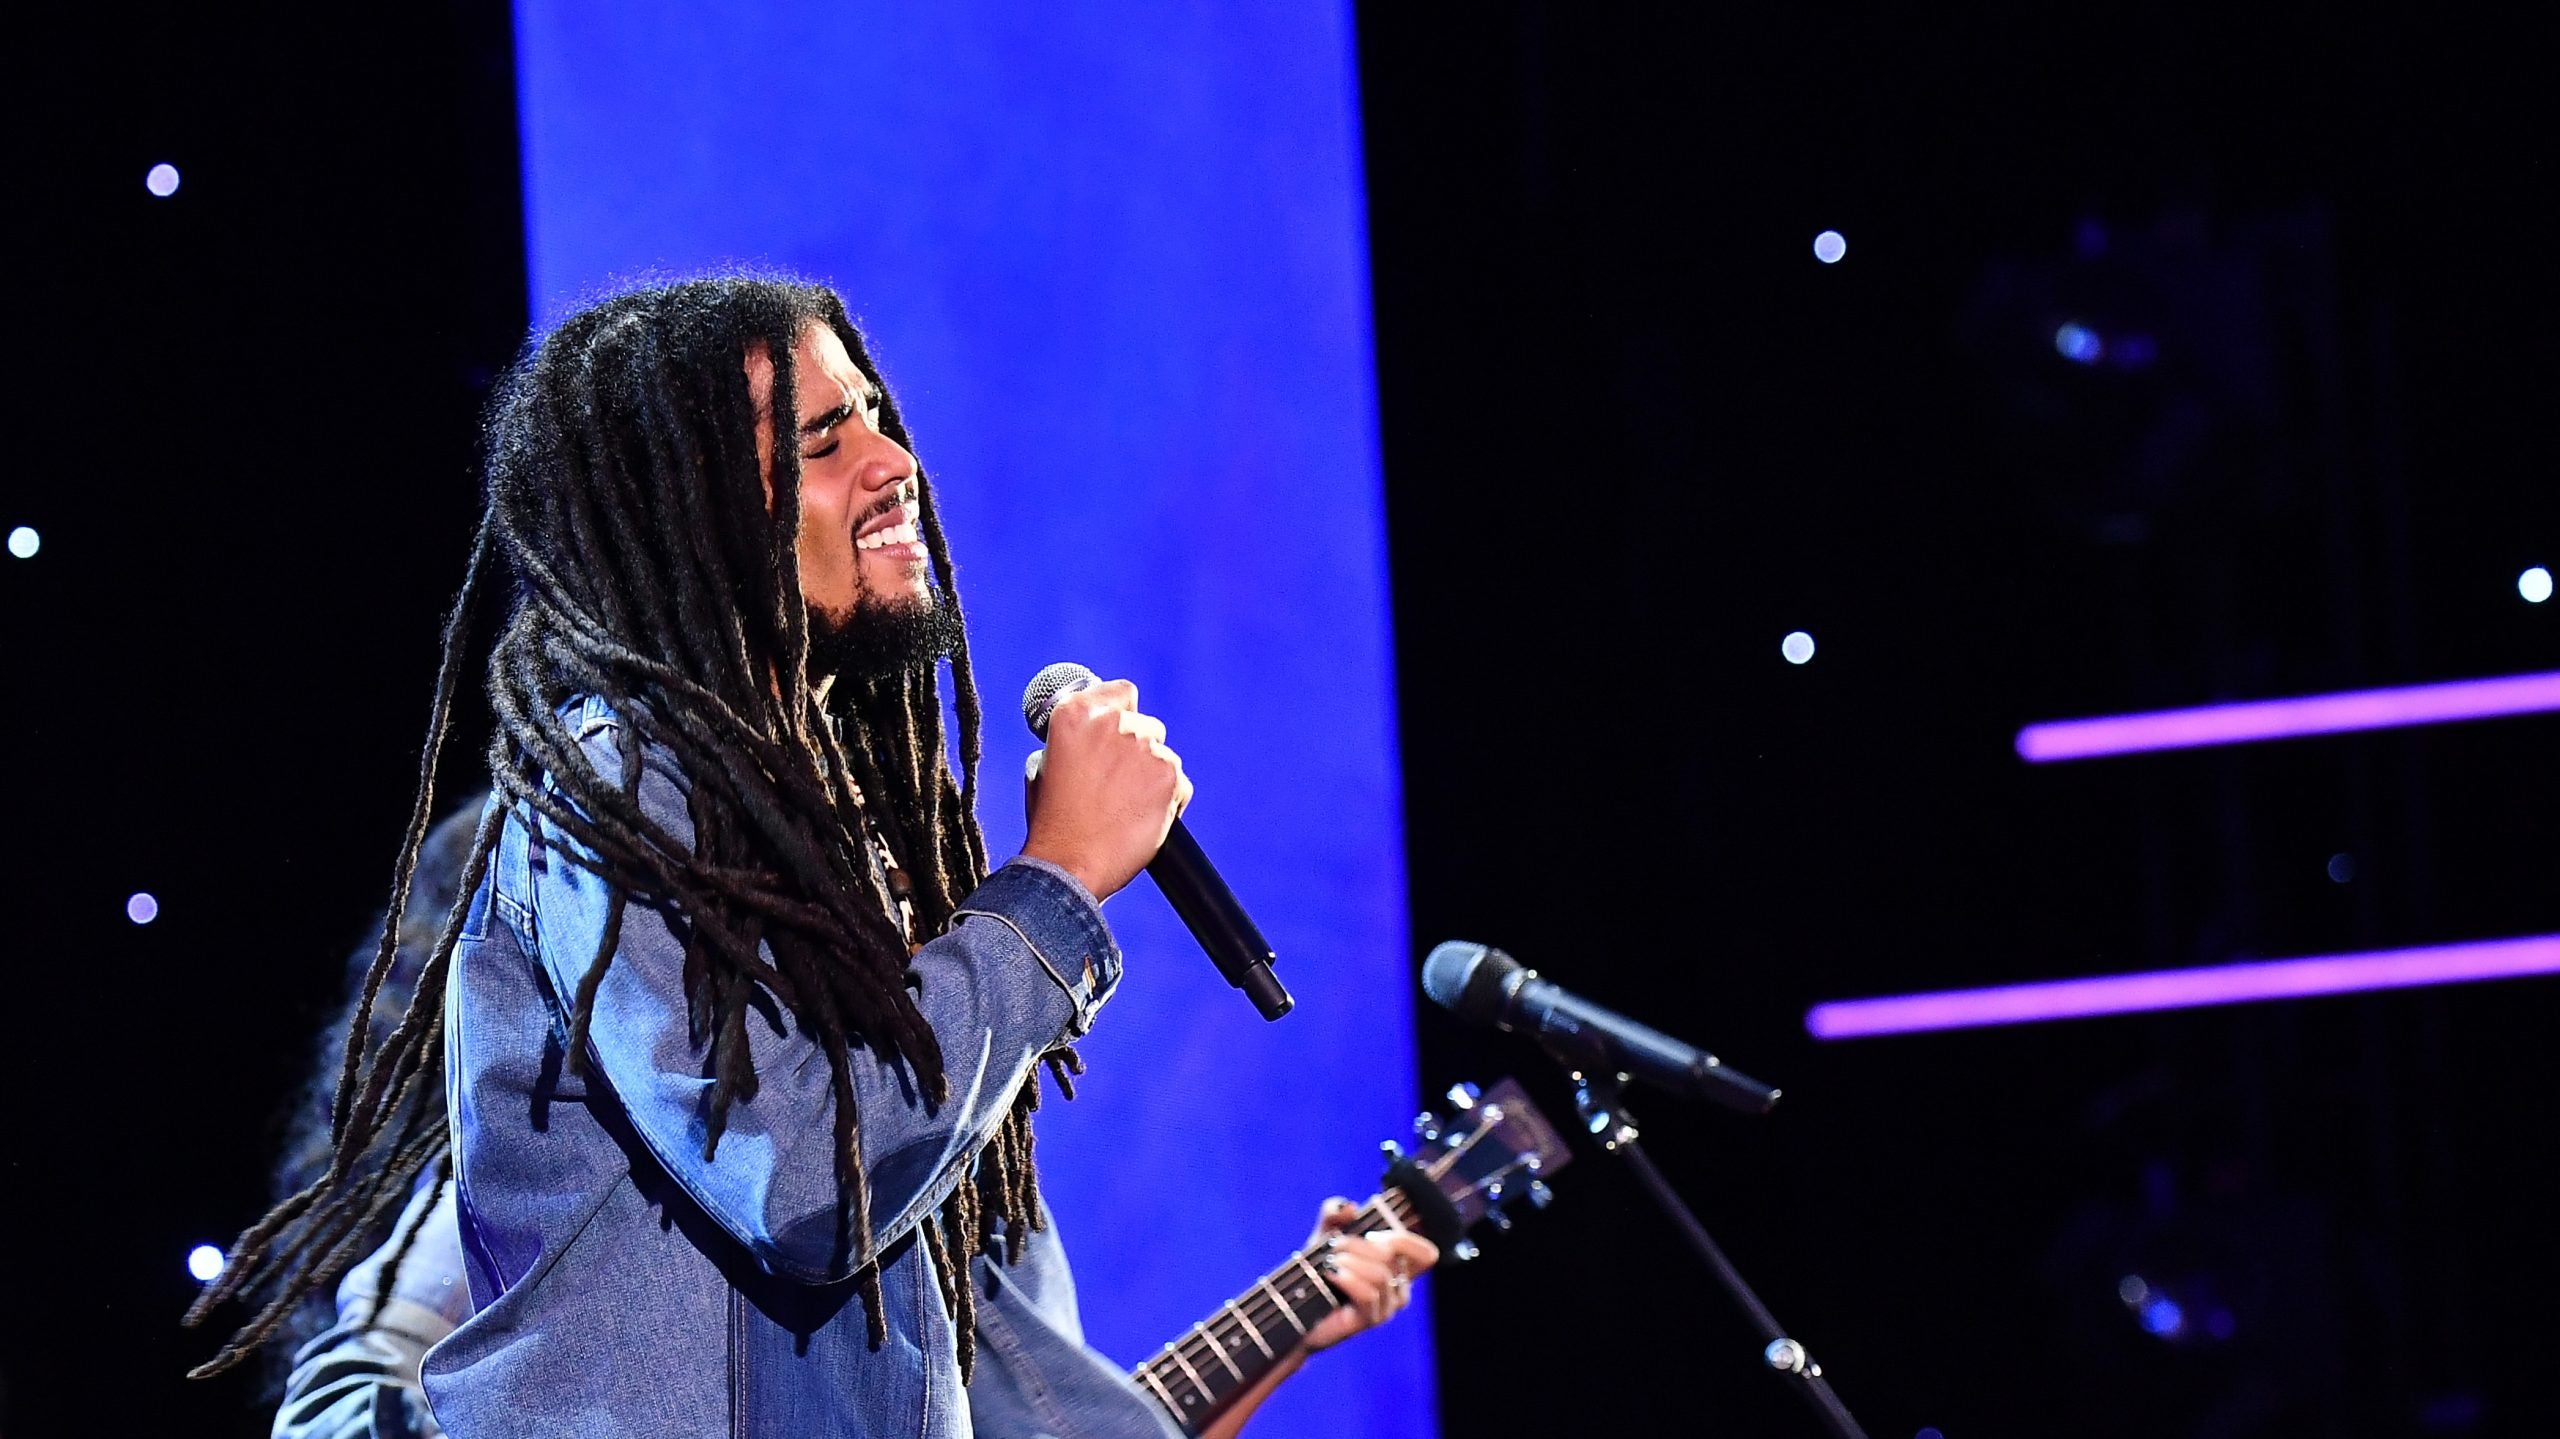 Skip Marley Makes Music History With ‘Slow Down’